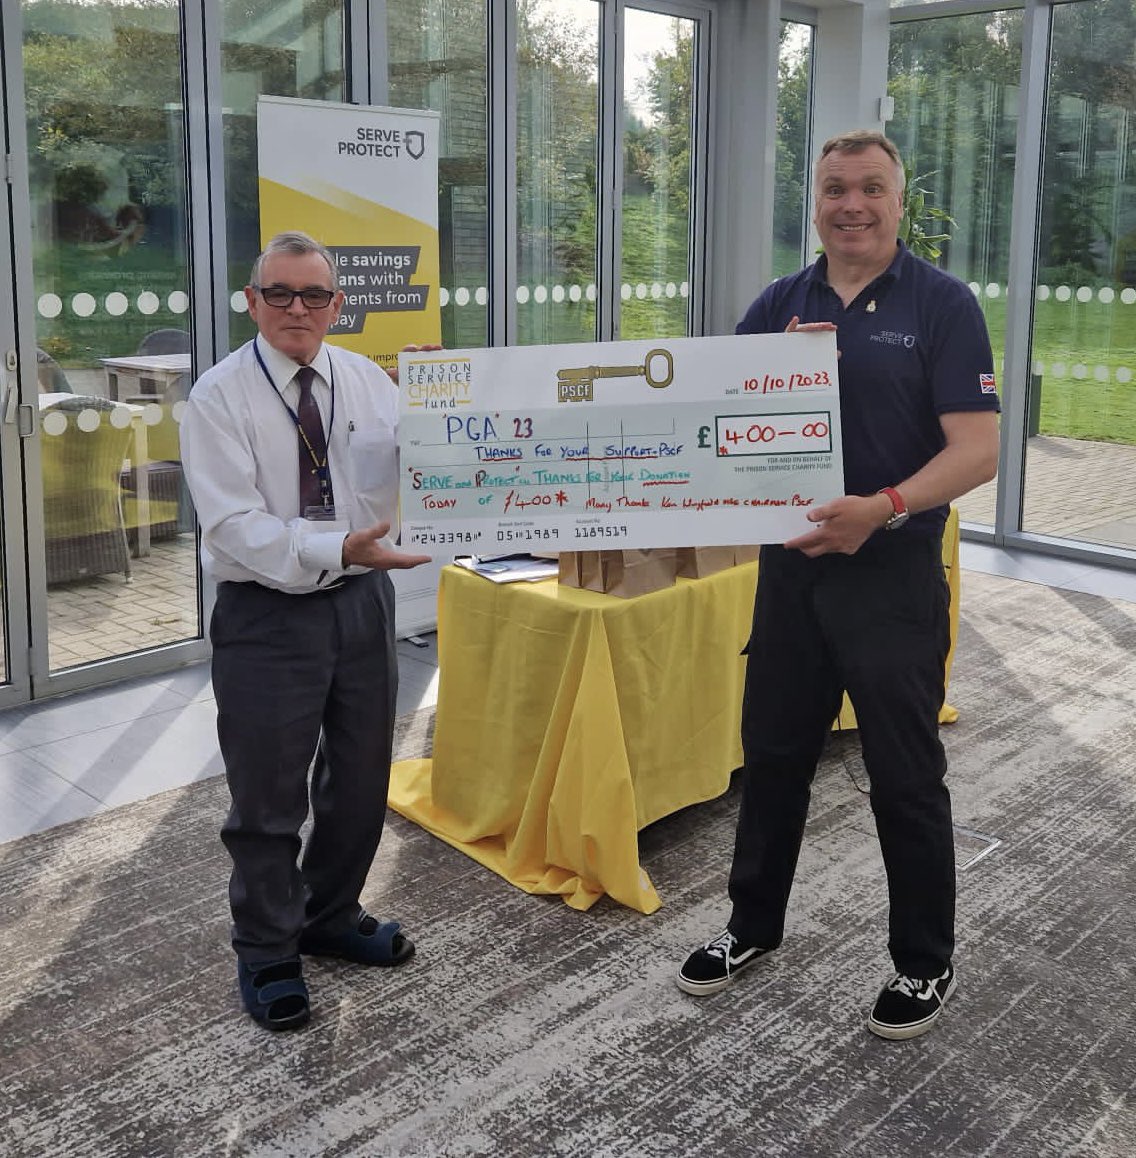 We are delighted to present @OfficialPSCF with their prize for their achievement in our Play and Give Challenge, which took place earlier this year 🏃

The prize has already been donated to Sefton Food Bank. Amazing work 👏

#PlayAndGive23